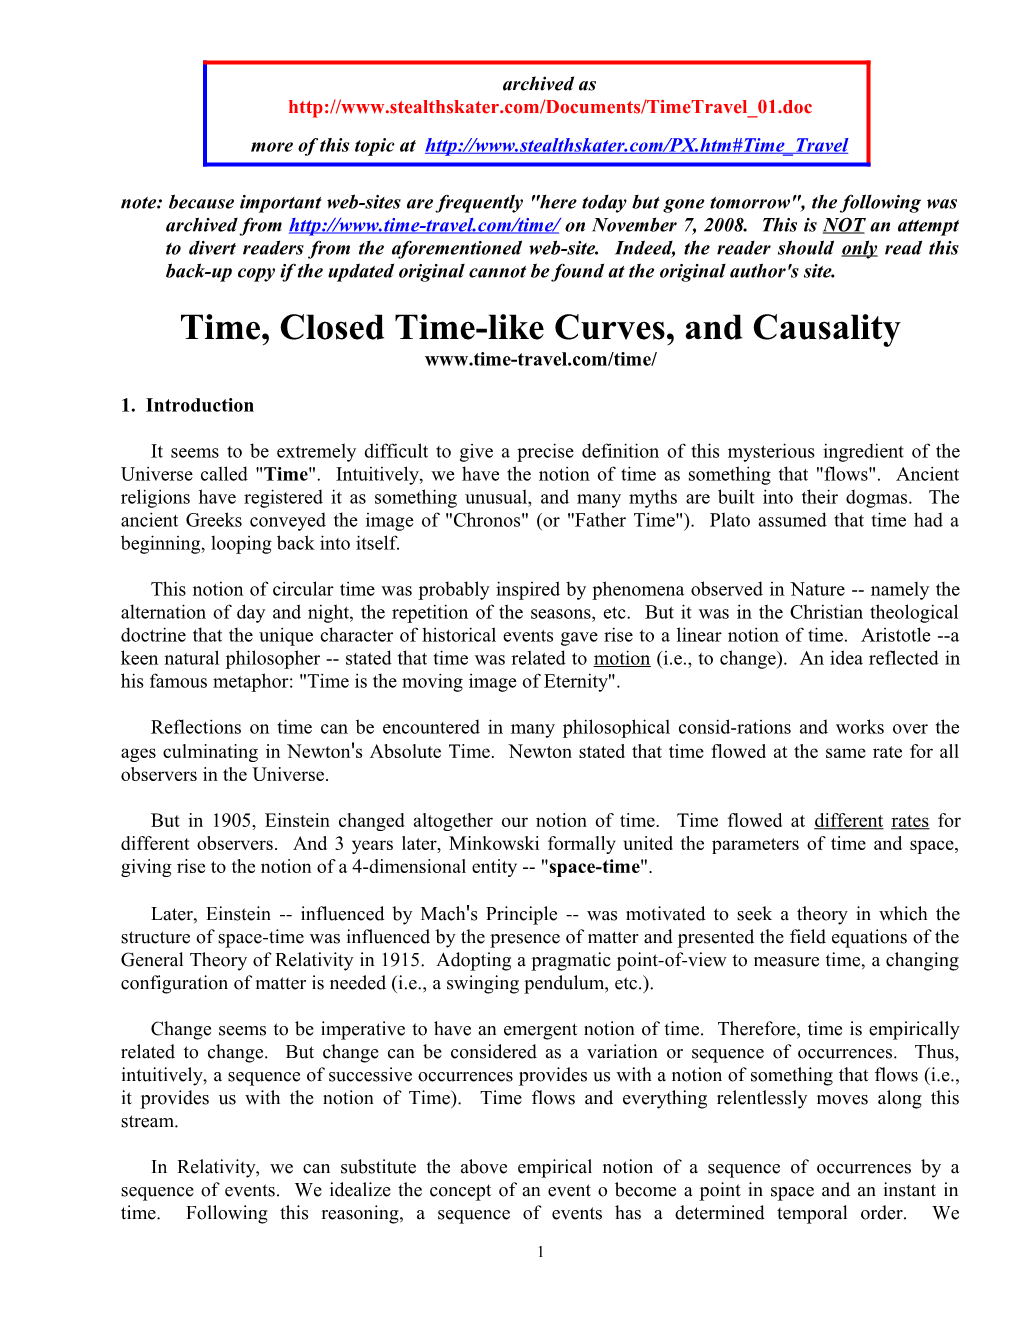 Time, Closed Time-Like Curves, and Causality